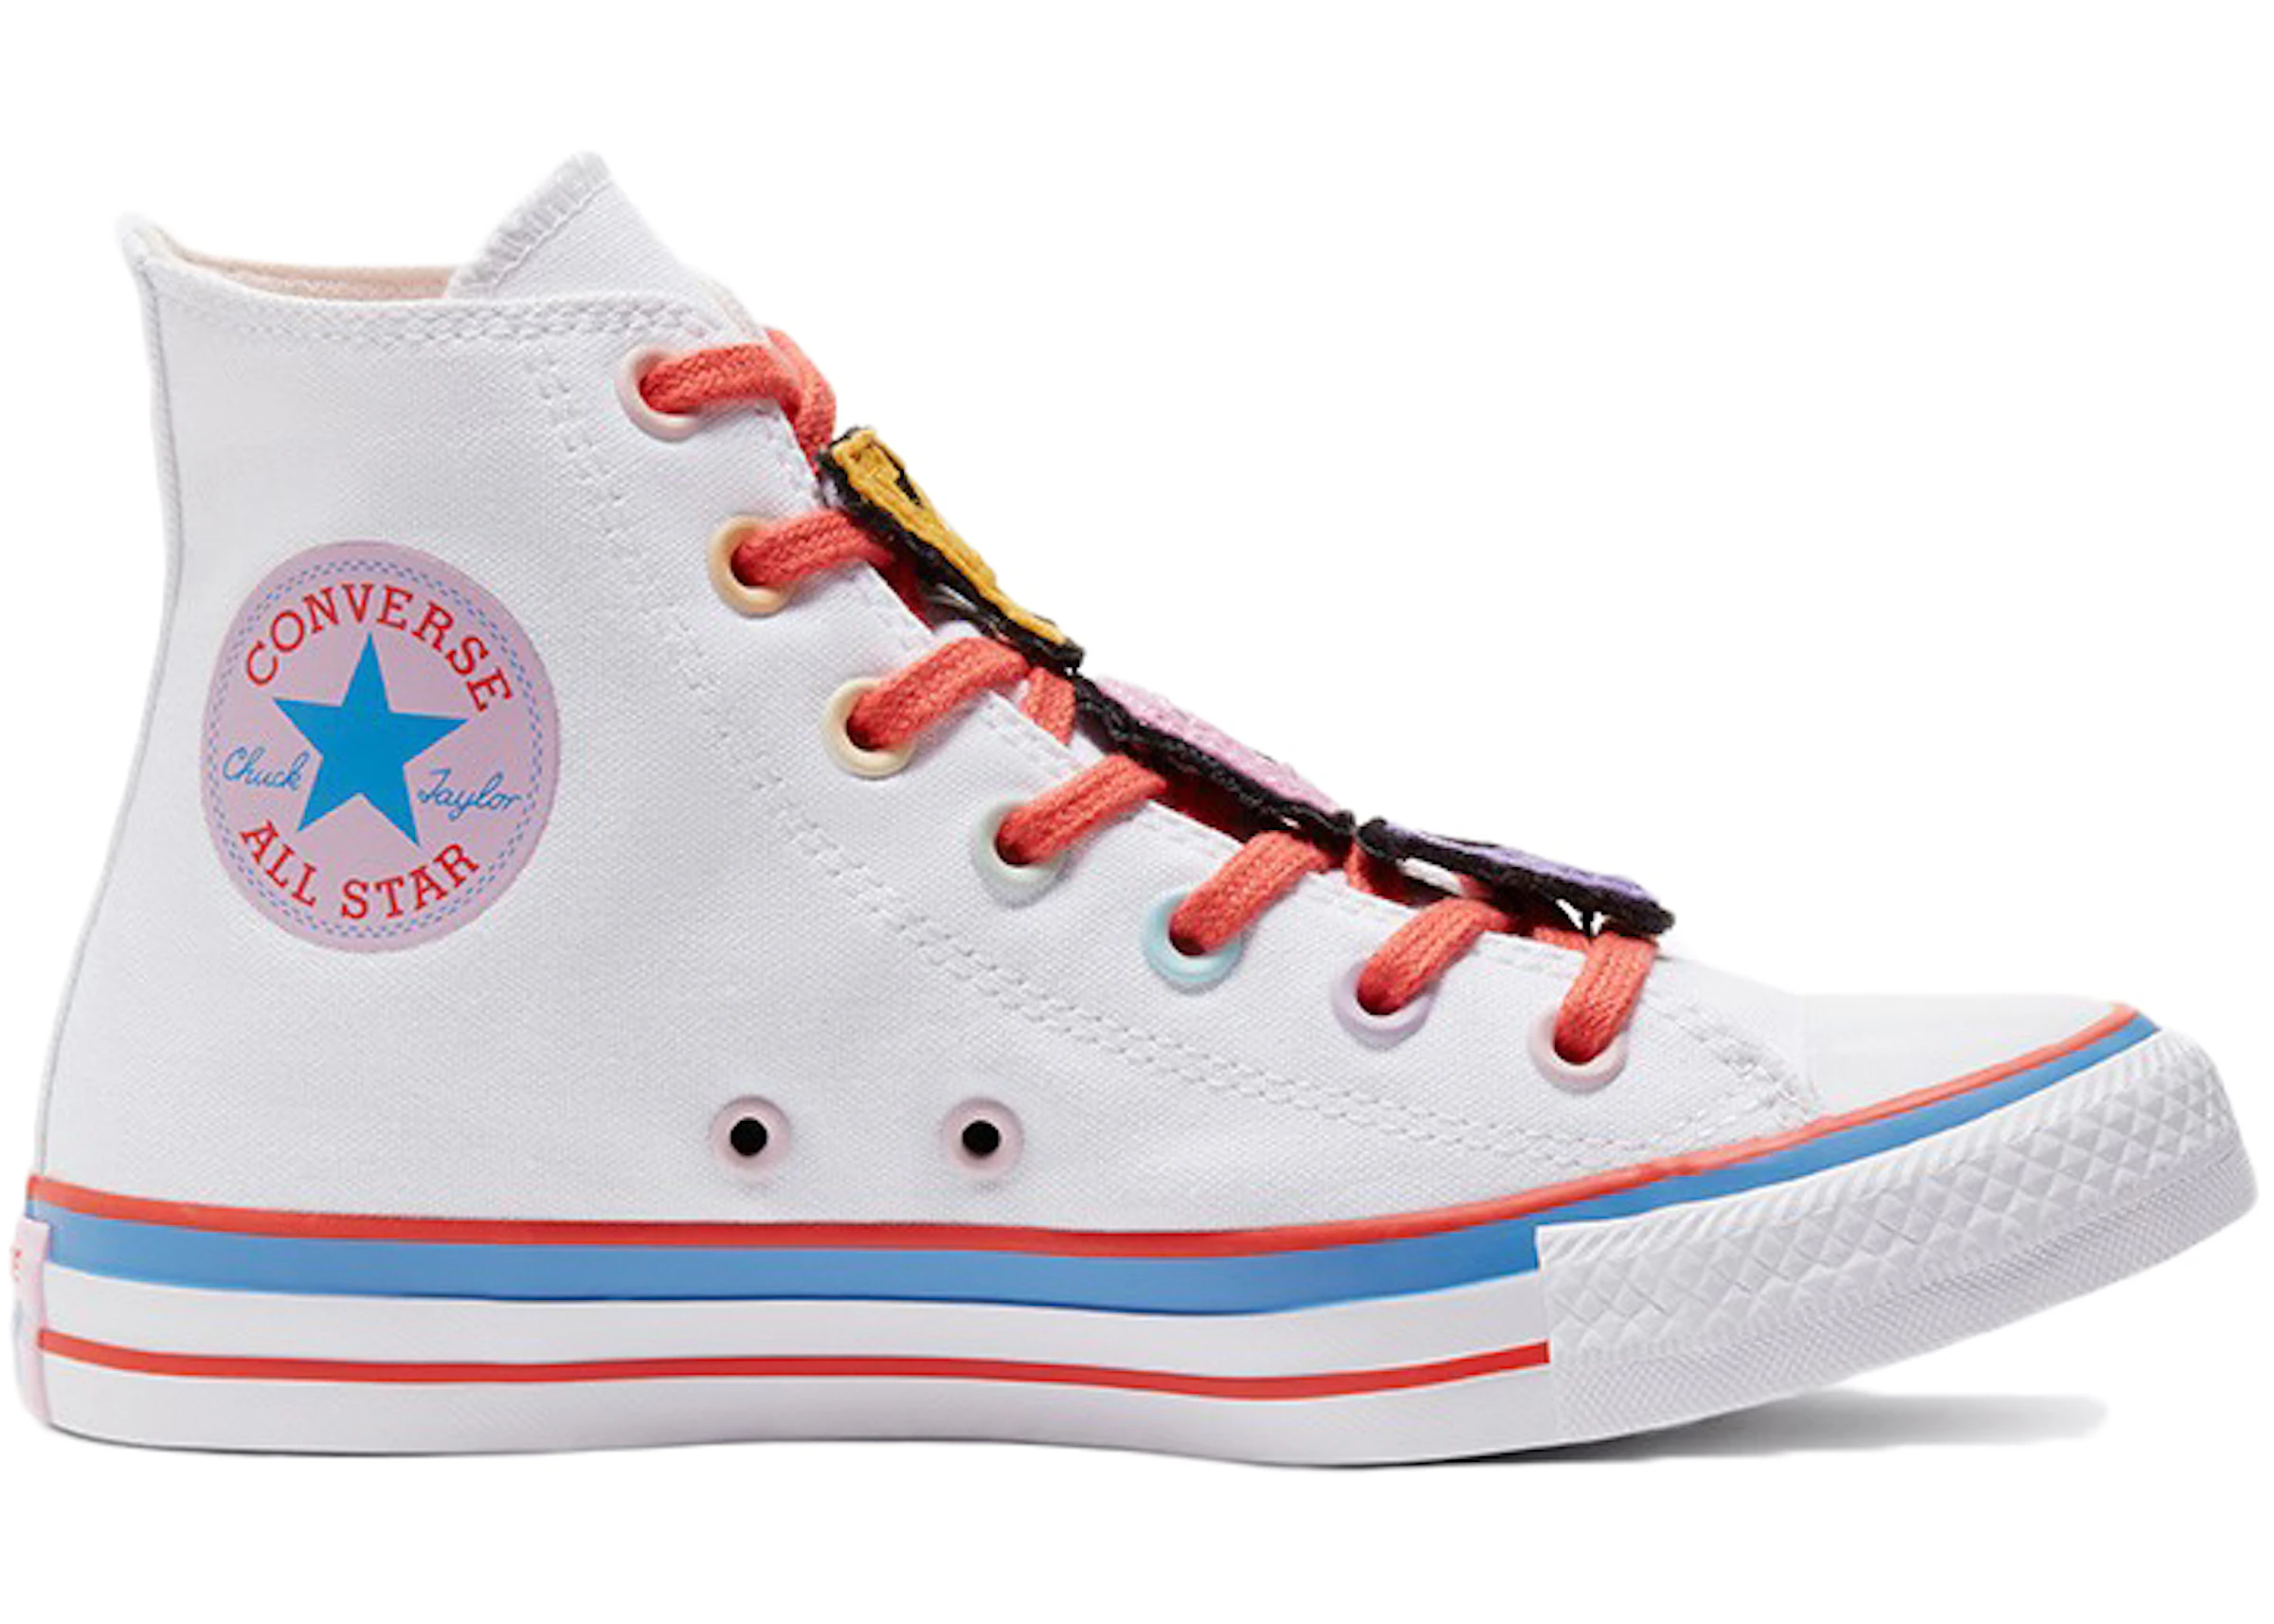 Converse Chuck Taylor All-Star Hi Millie Bobby Brown (Women's) - 567299C -  US